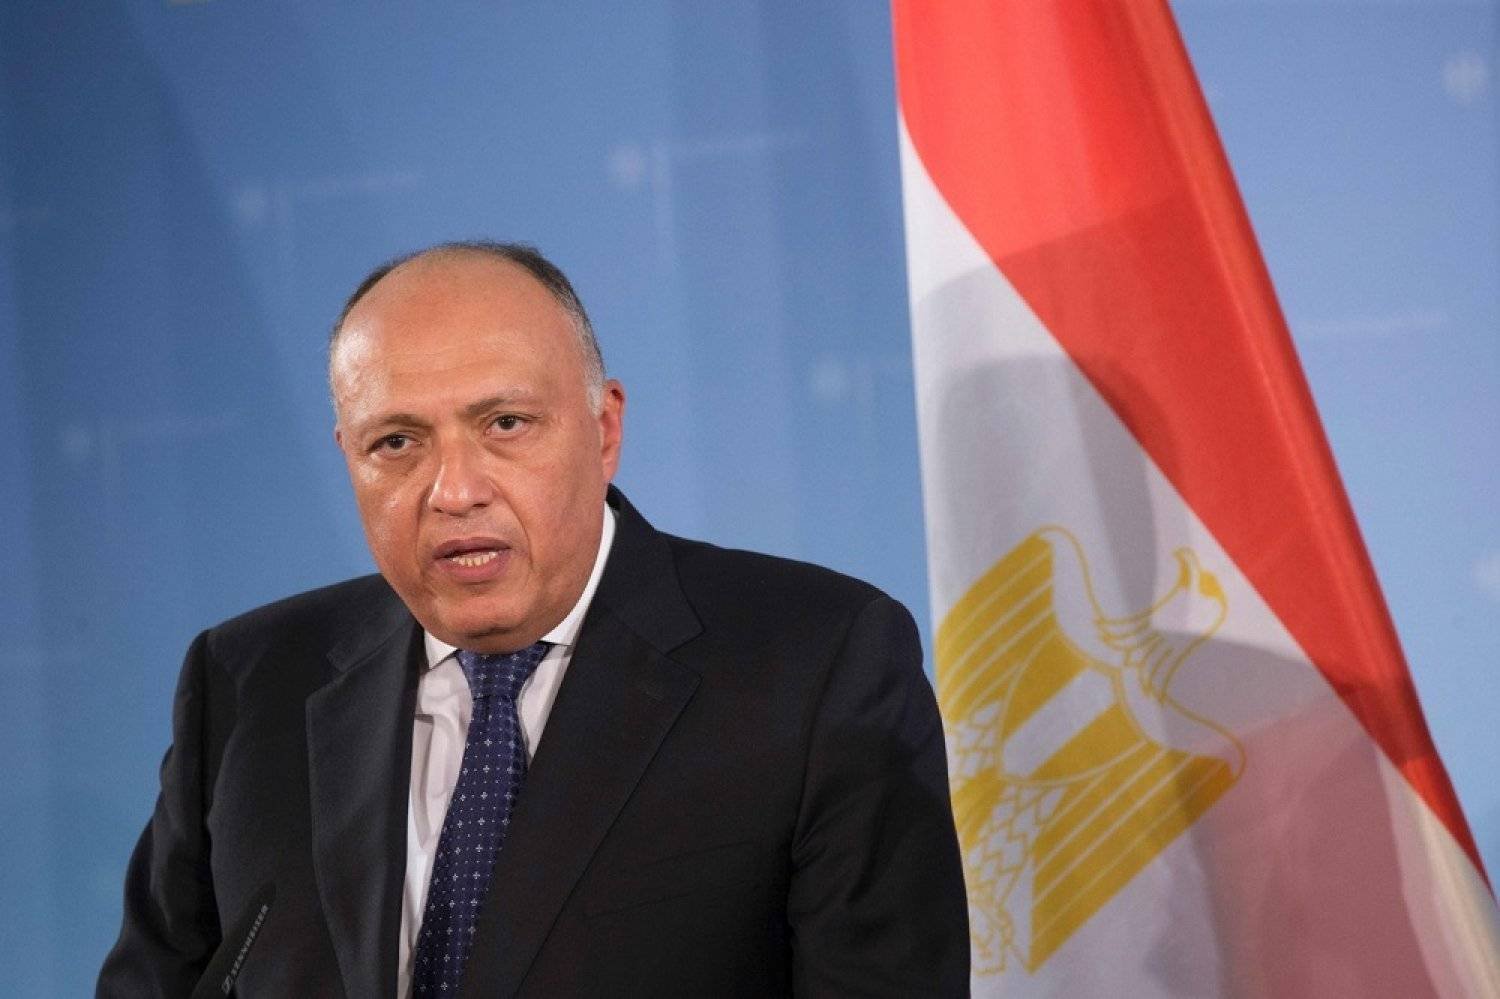 Egyptian Foreign Minister Sameh Shoukry at a press conference in Berlin in January 2016. (AFP)
